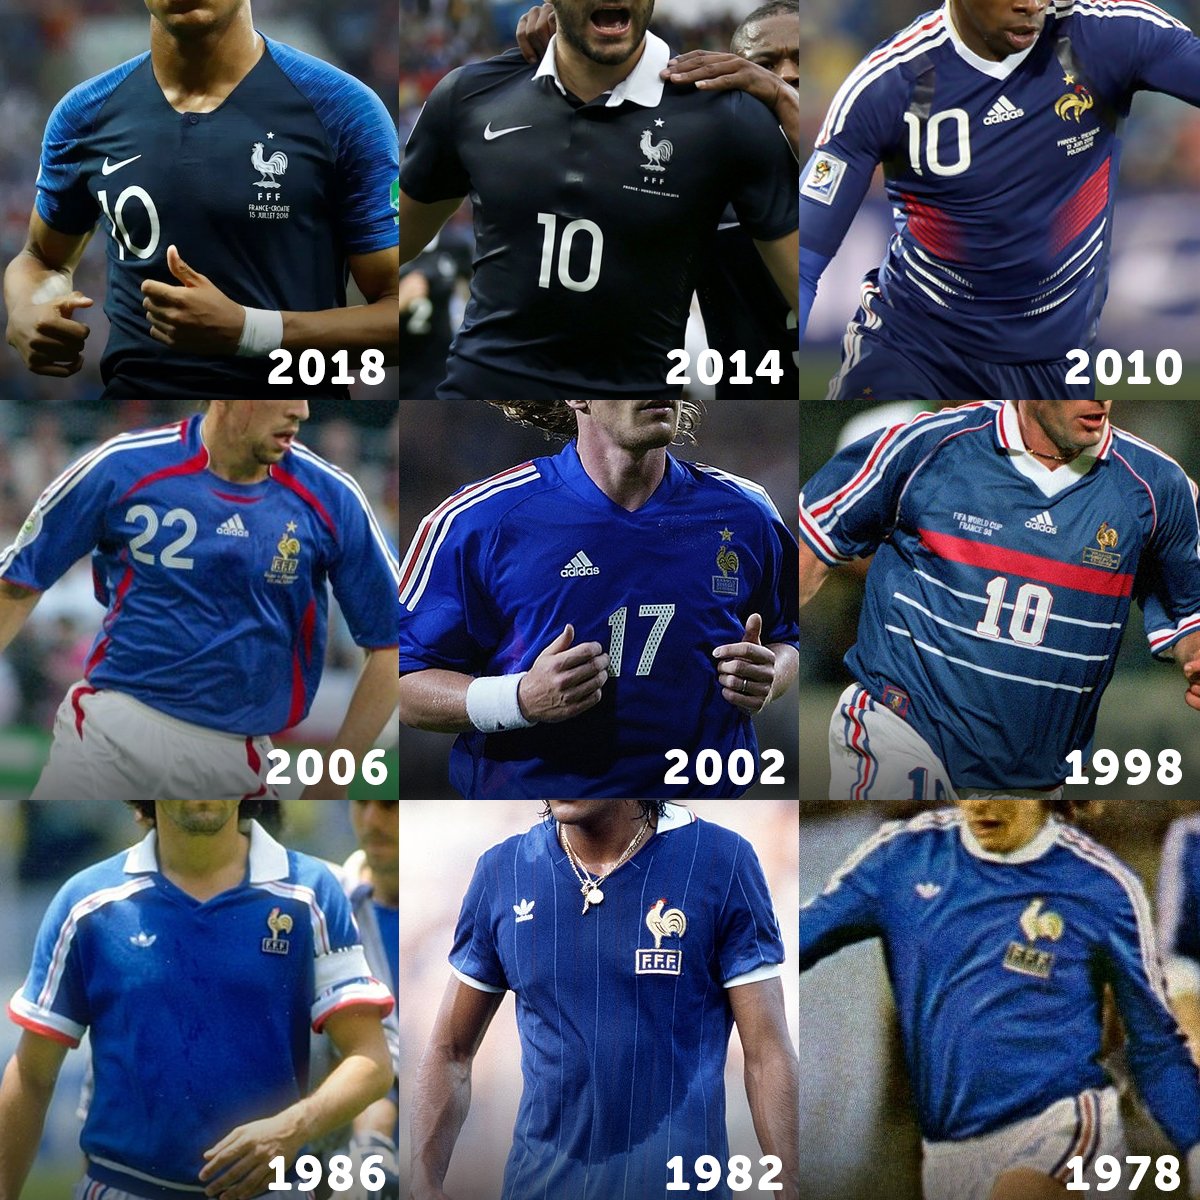 Egoísmo Me gusta hombro Full France Home Kit History | Adidas or Nike - Whose France Kits Are  Better? - Footy Headlines